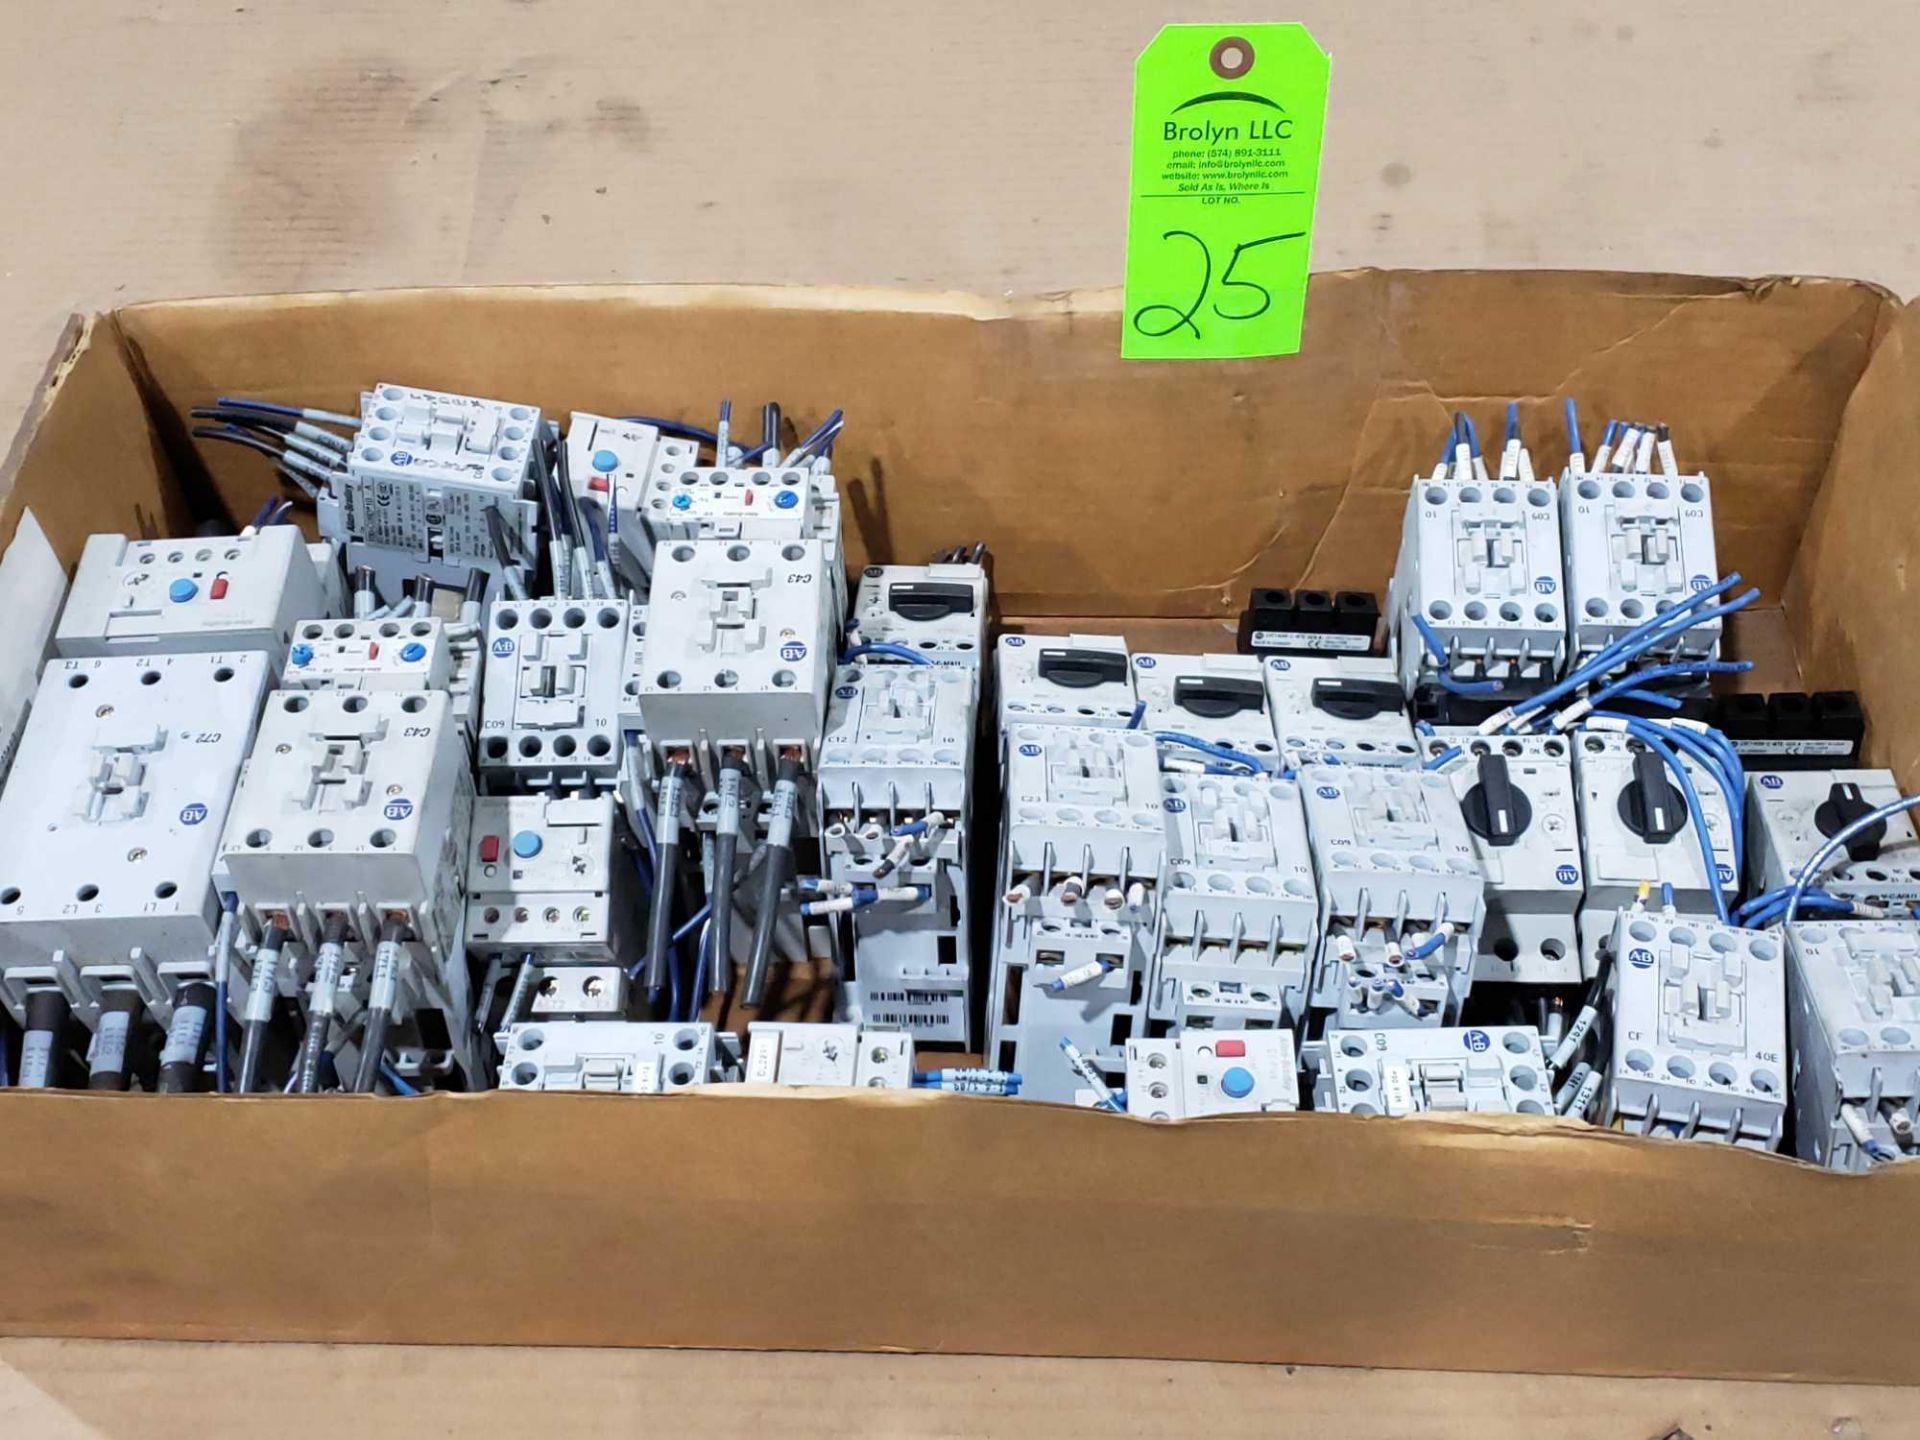 Large Qty of Allen Bradley Contactors in assorted sizes and part numbers. - Image 5 of 5